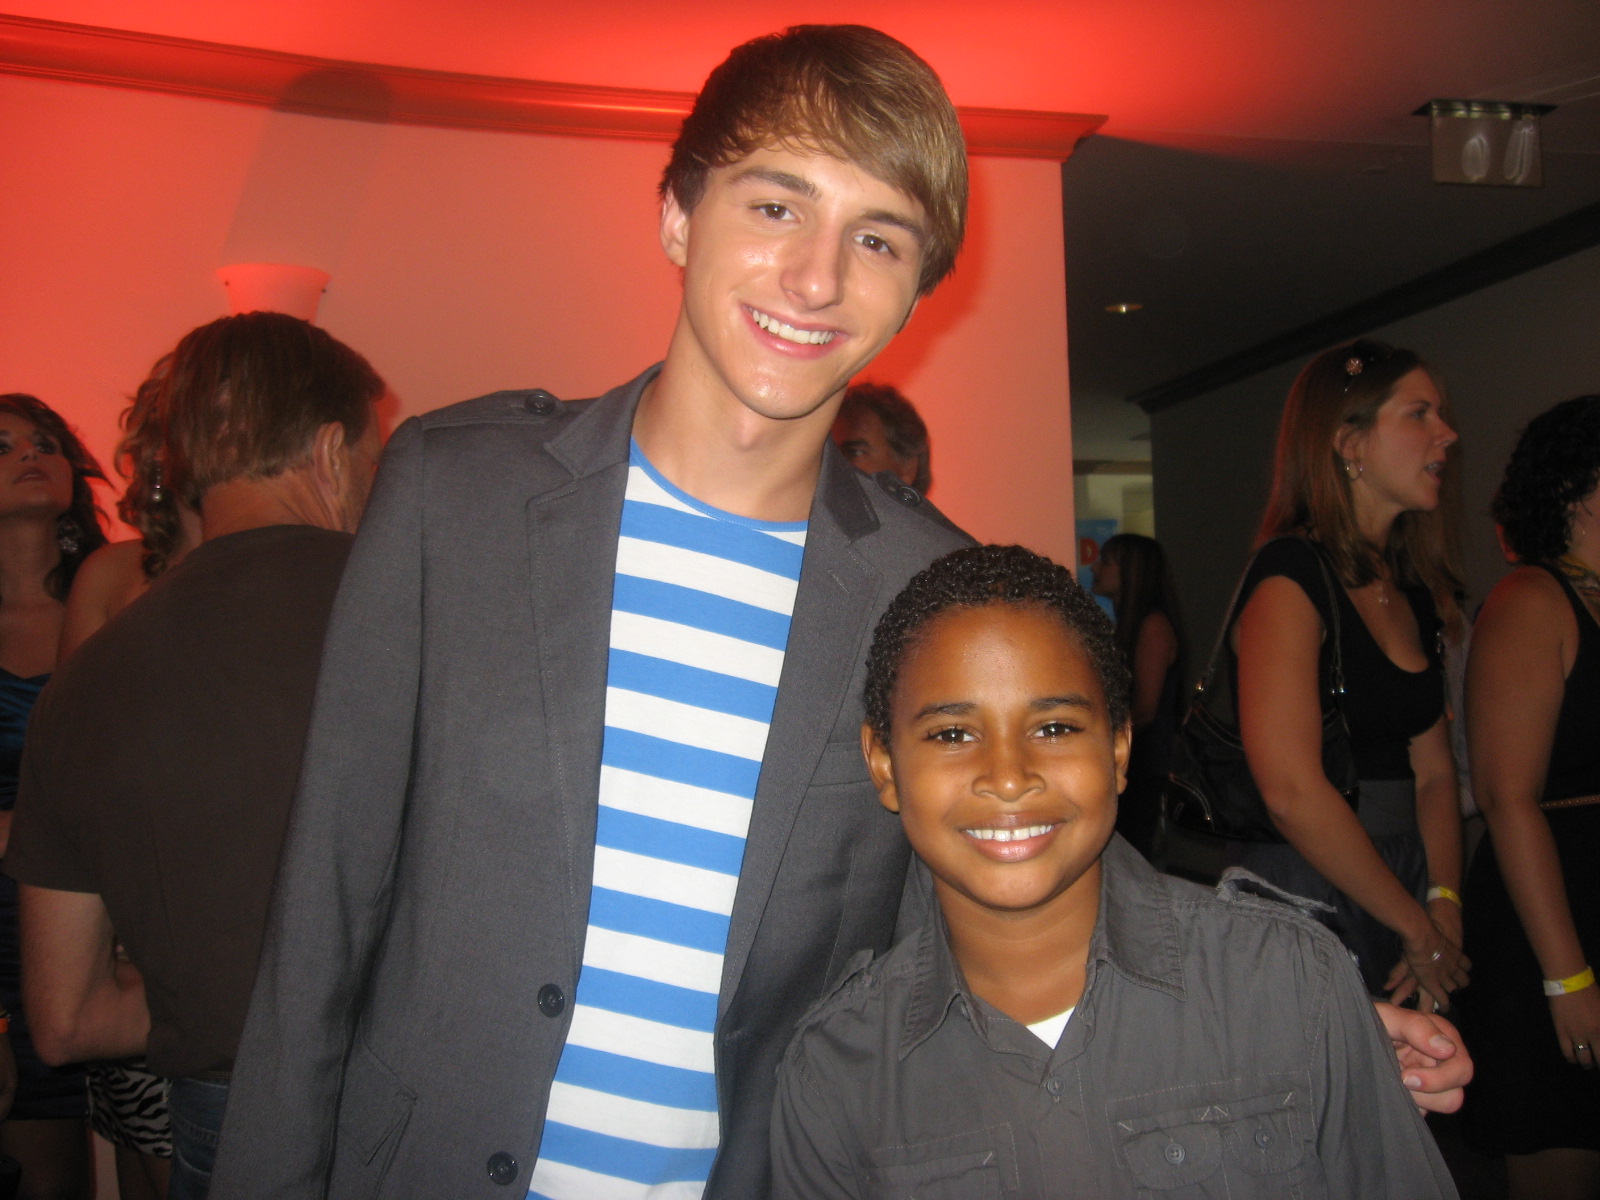 Zechariah Dardaine and Lucas Cruikshank at the 'Fred the movie